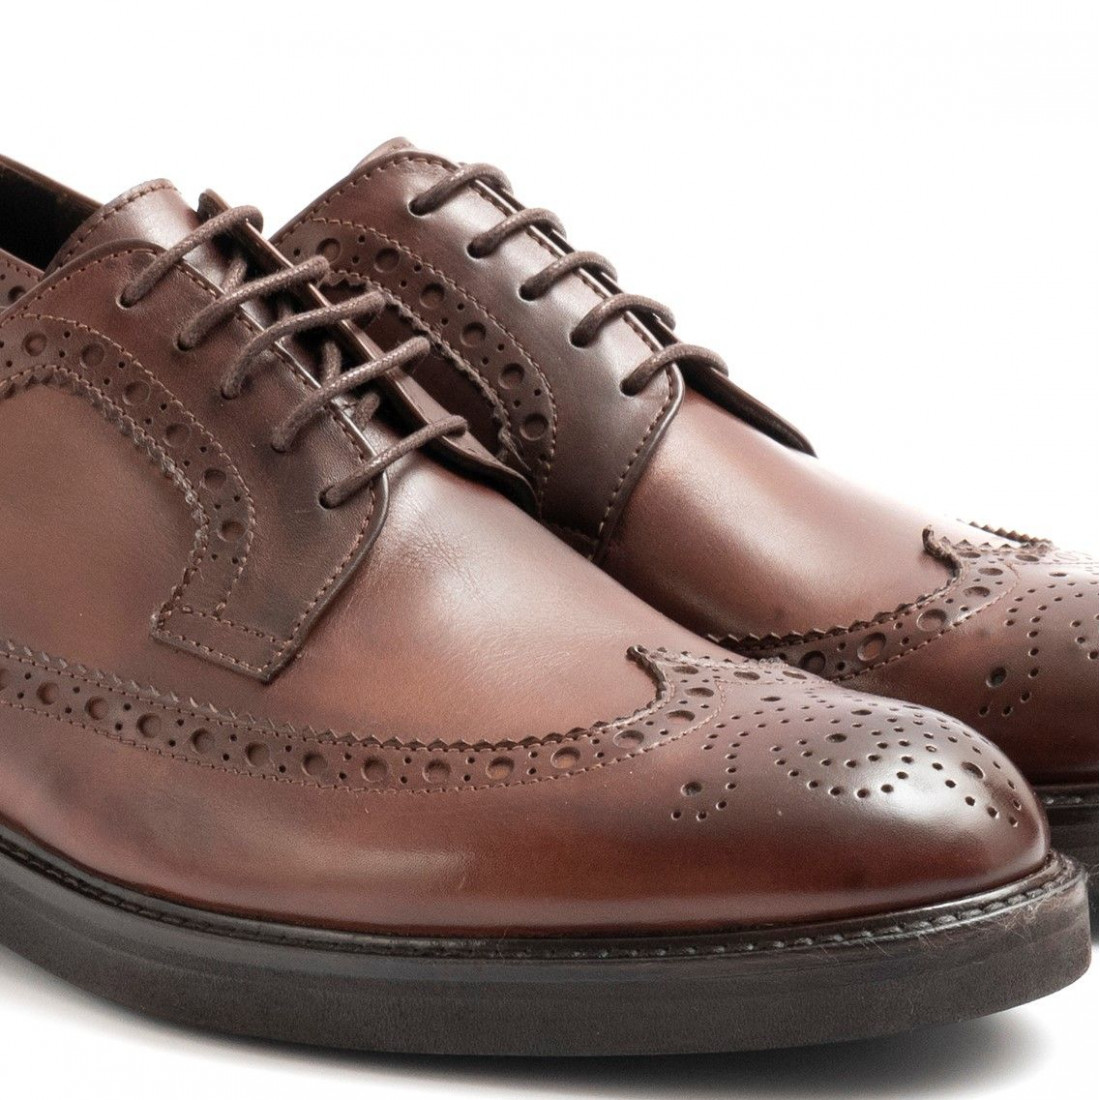 Men's Jerold Wilton derby shoes in brown leather